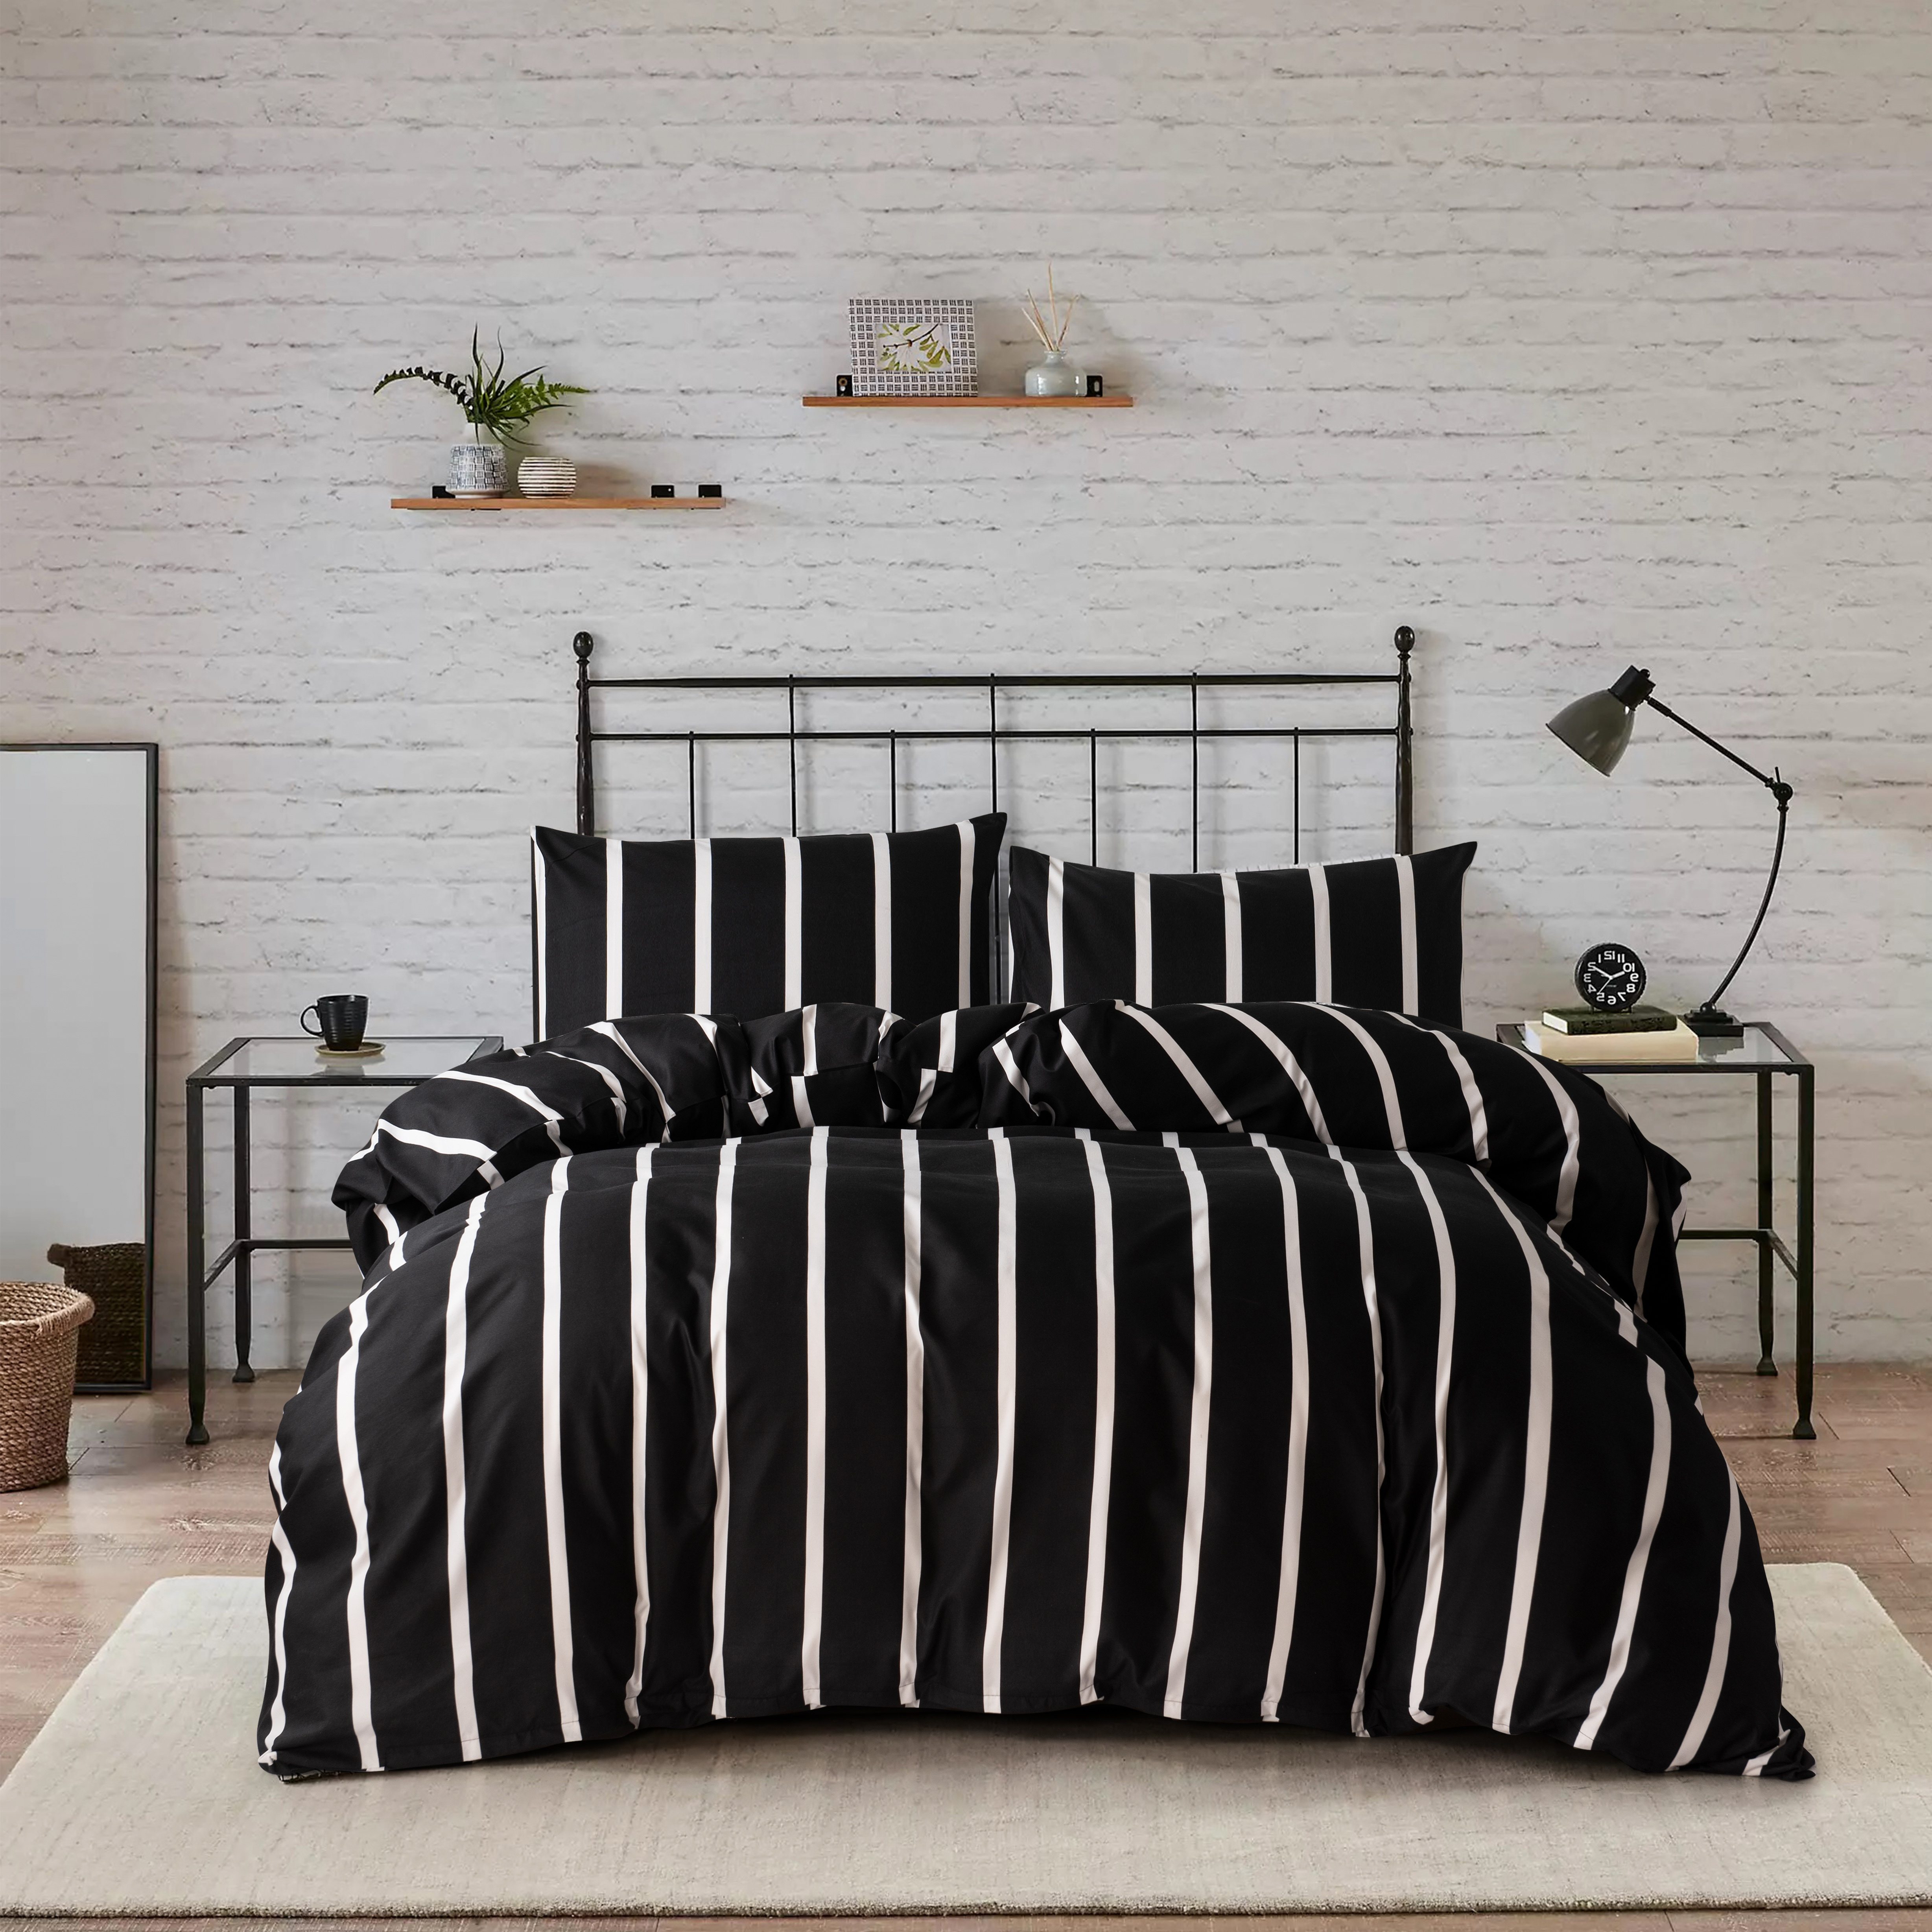 

Black And White Striped Comforter Set Microfiber 2/3pieces Queen Duvet Cover Set "x90"with Zipper Closure And 2 Pillow Shams Soft Lightweight Hotel Black Bedding Set